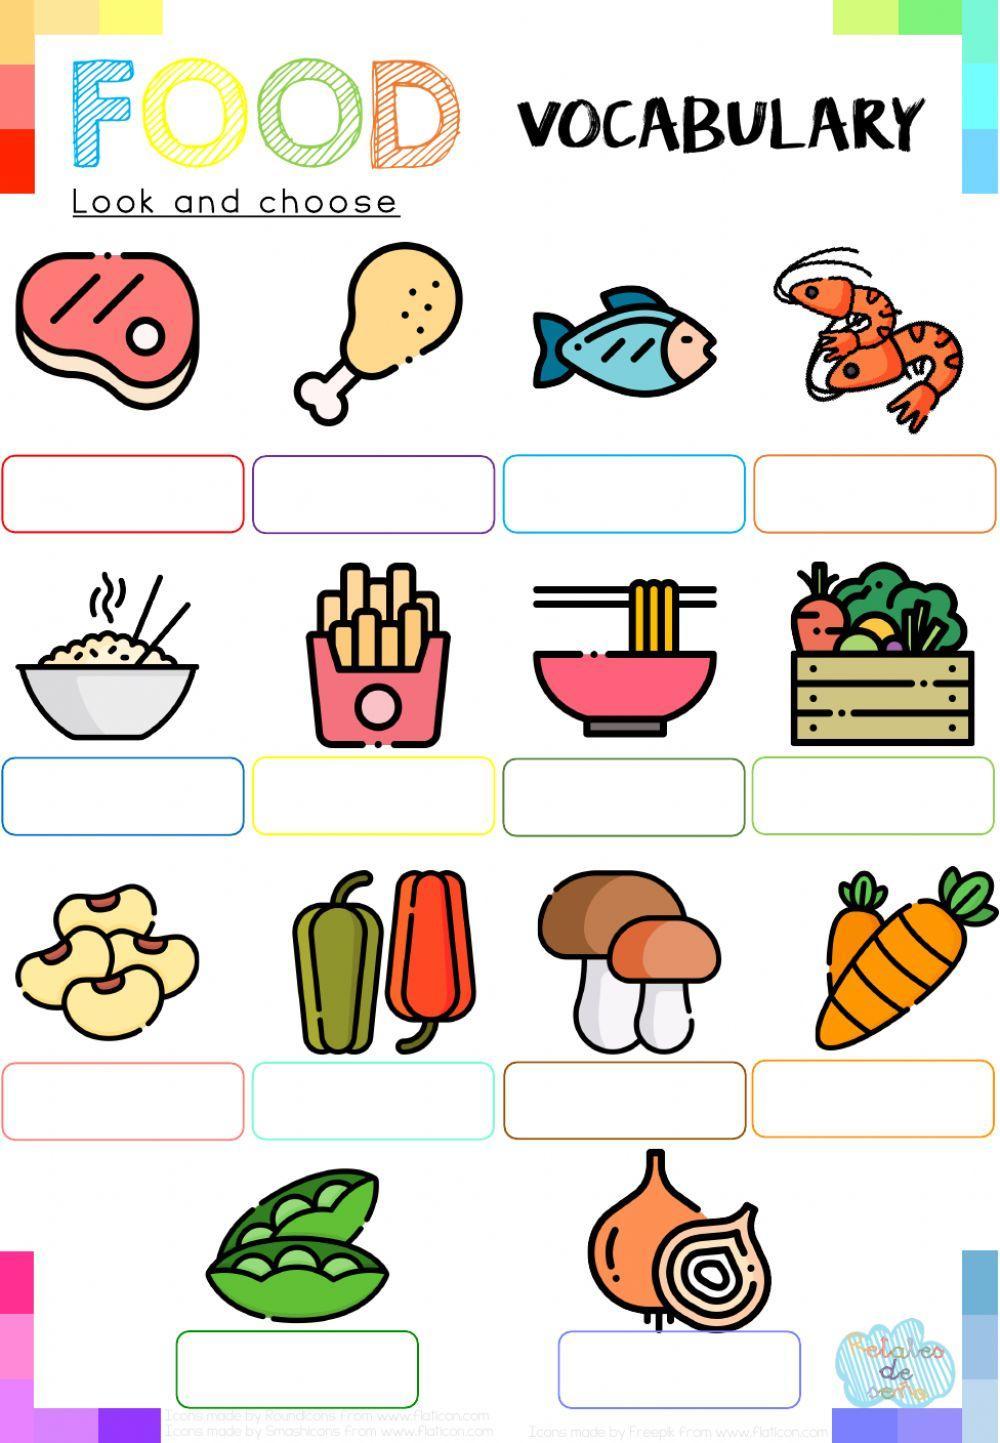 Look and choose: Vocabulary food